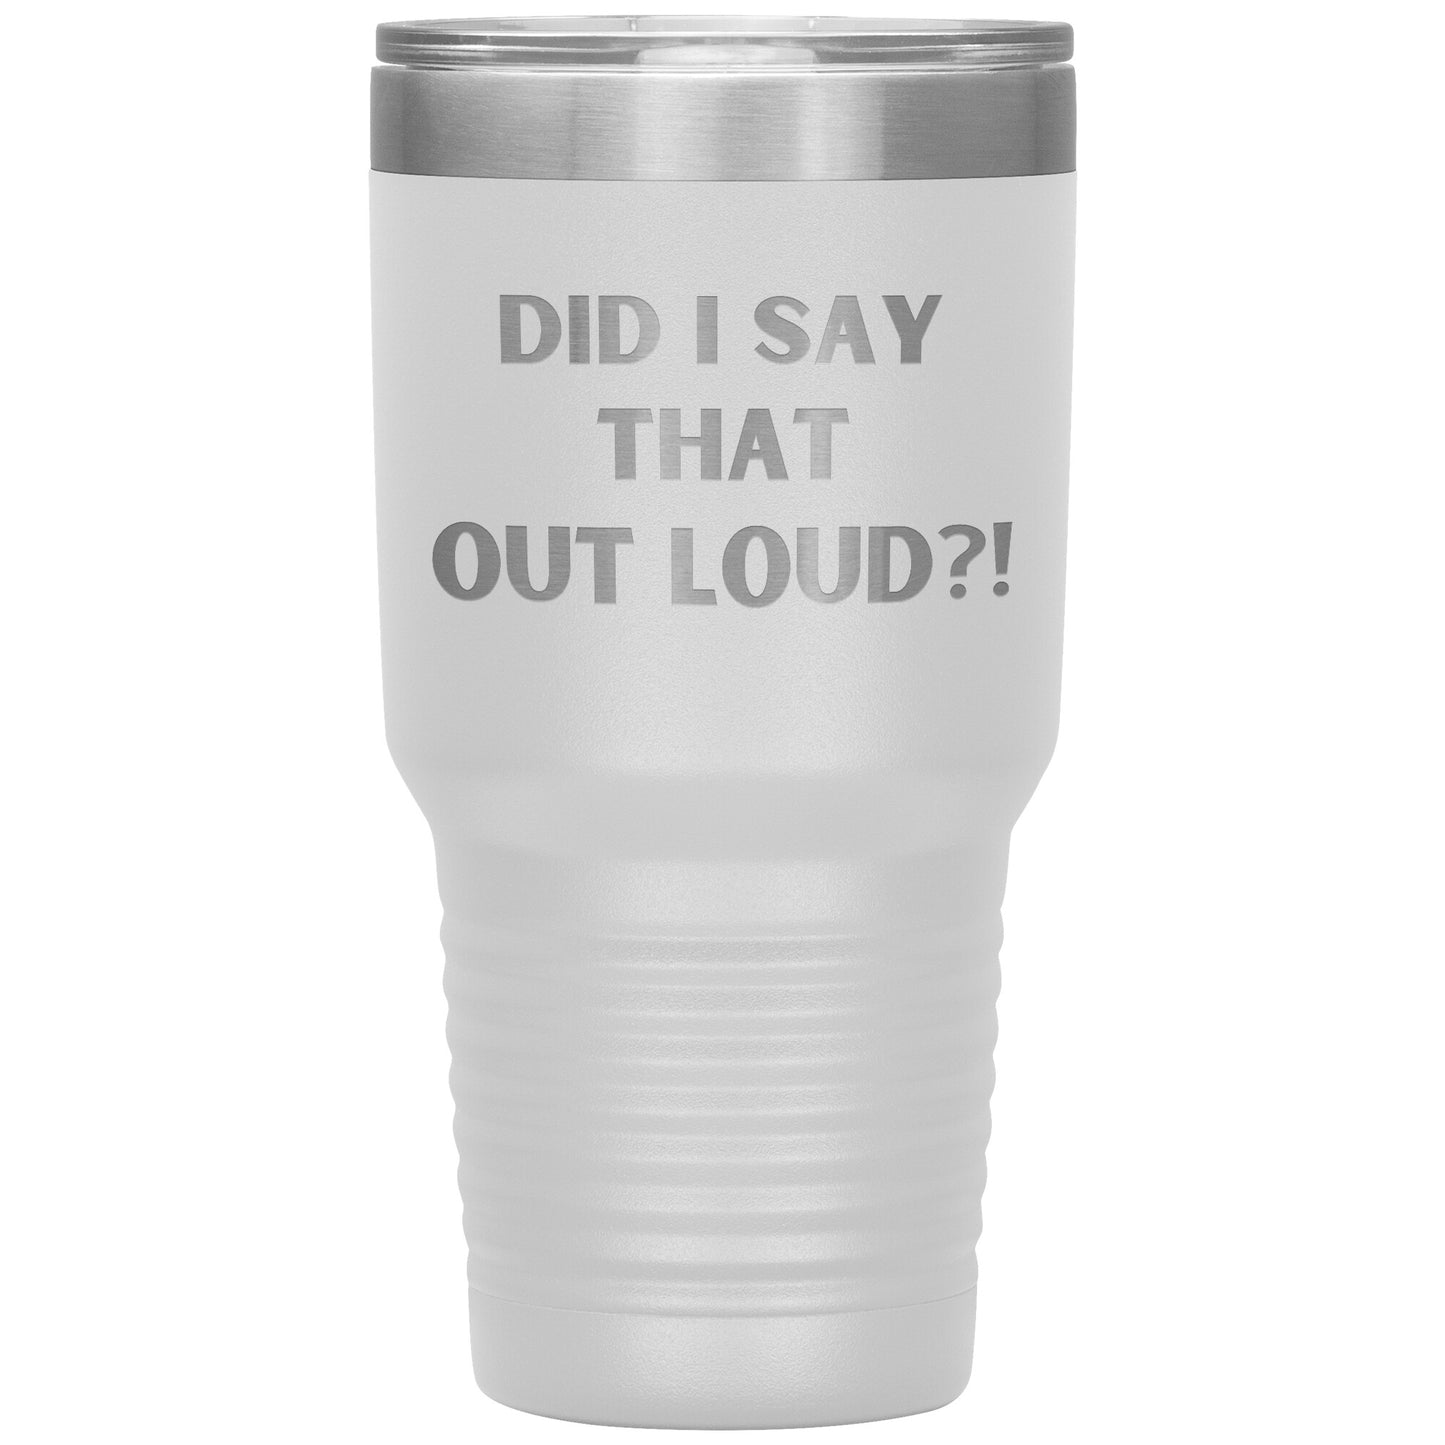 "Did I say That Out Loud?!" Durable, Insulated 30 oz. Tumbler